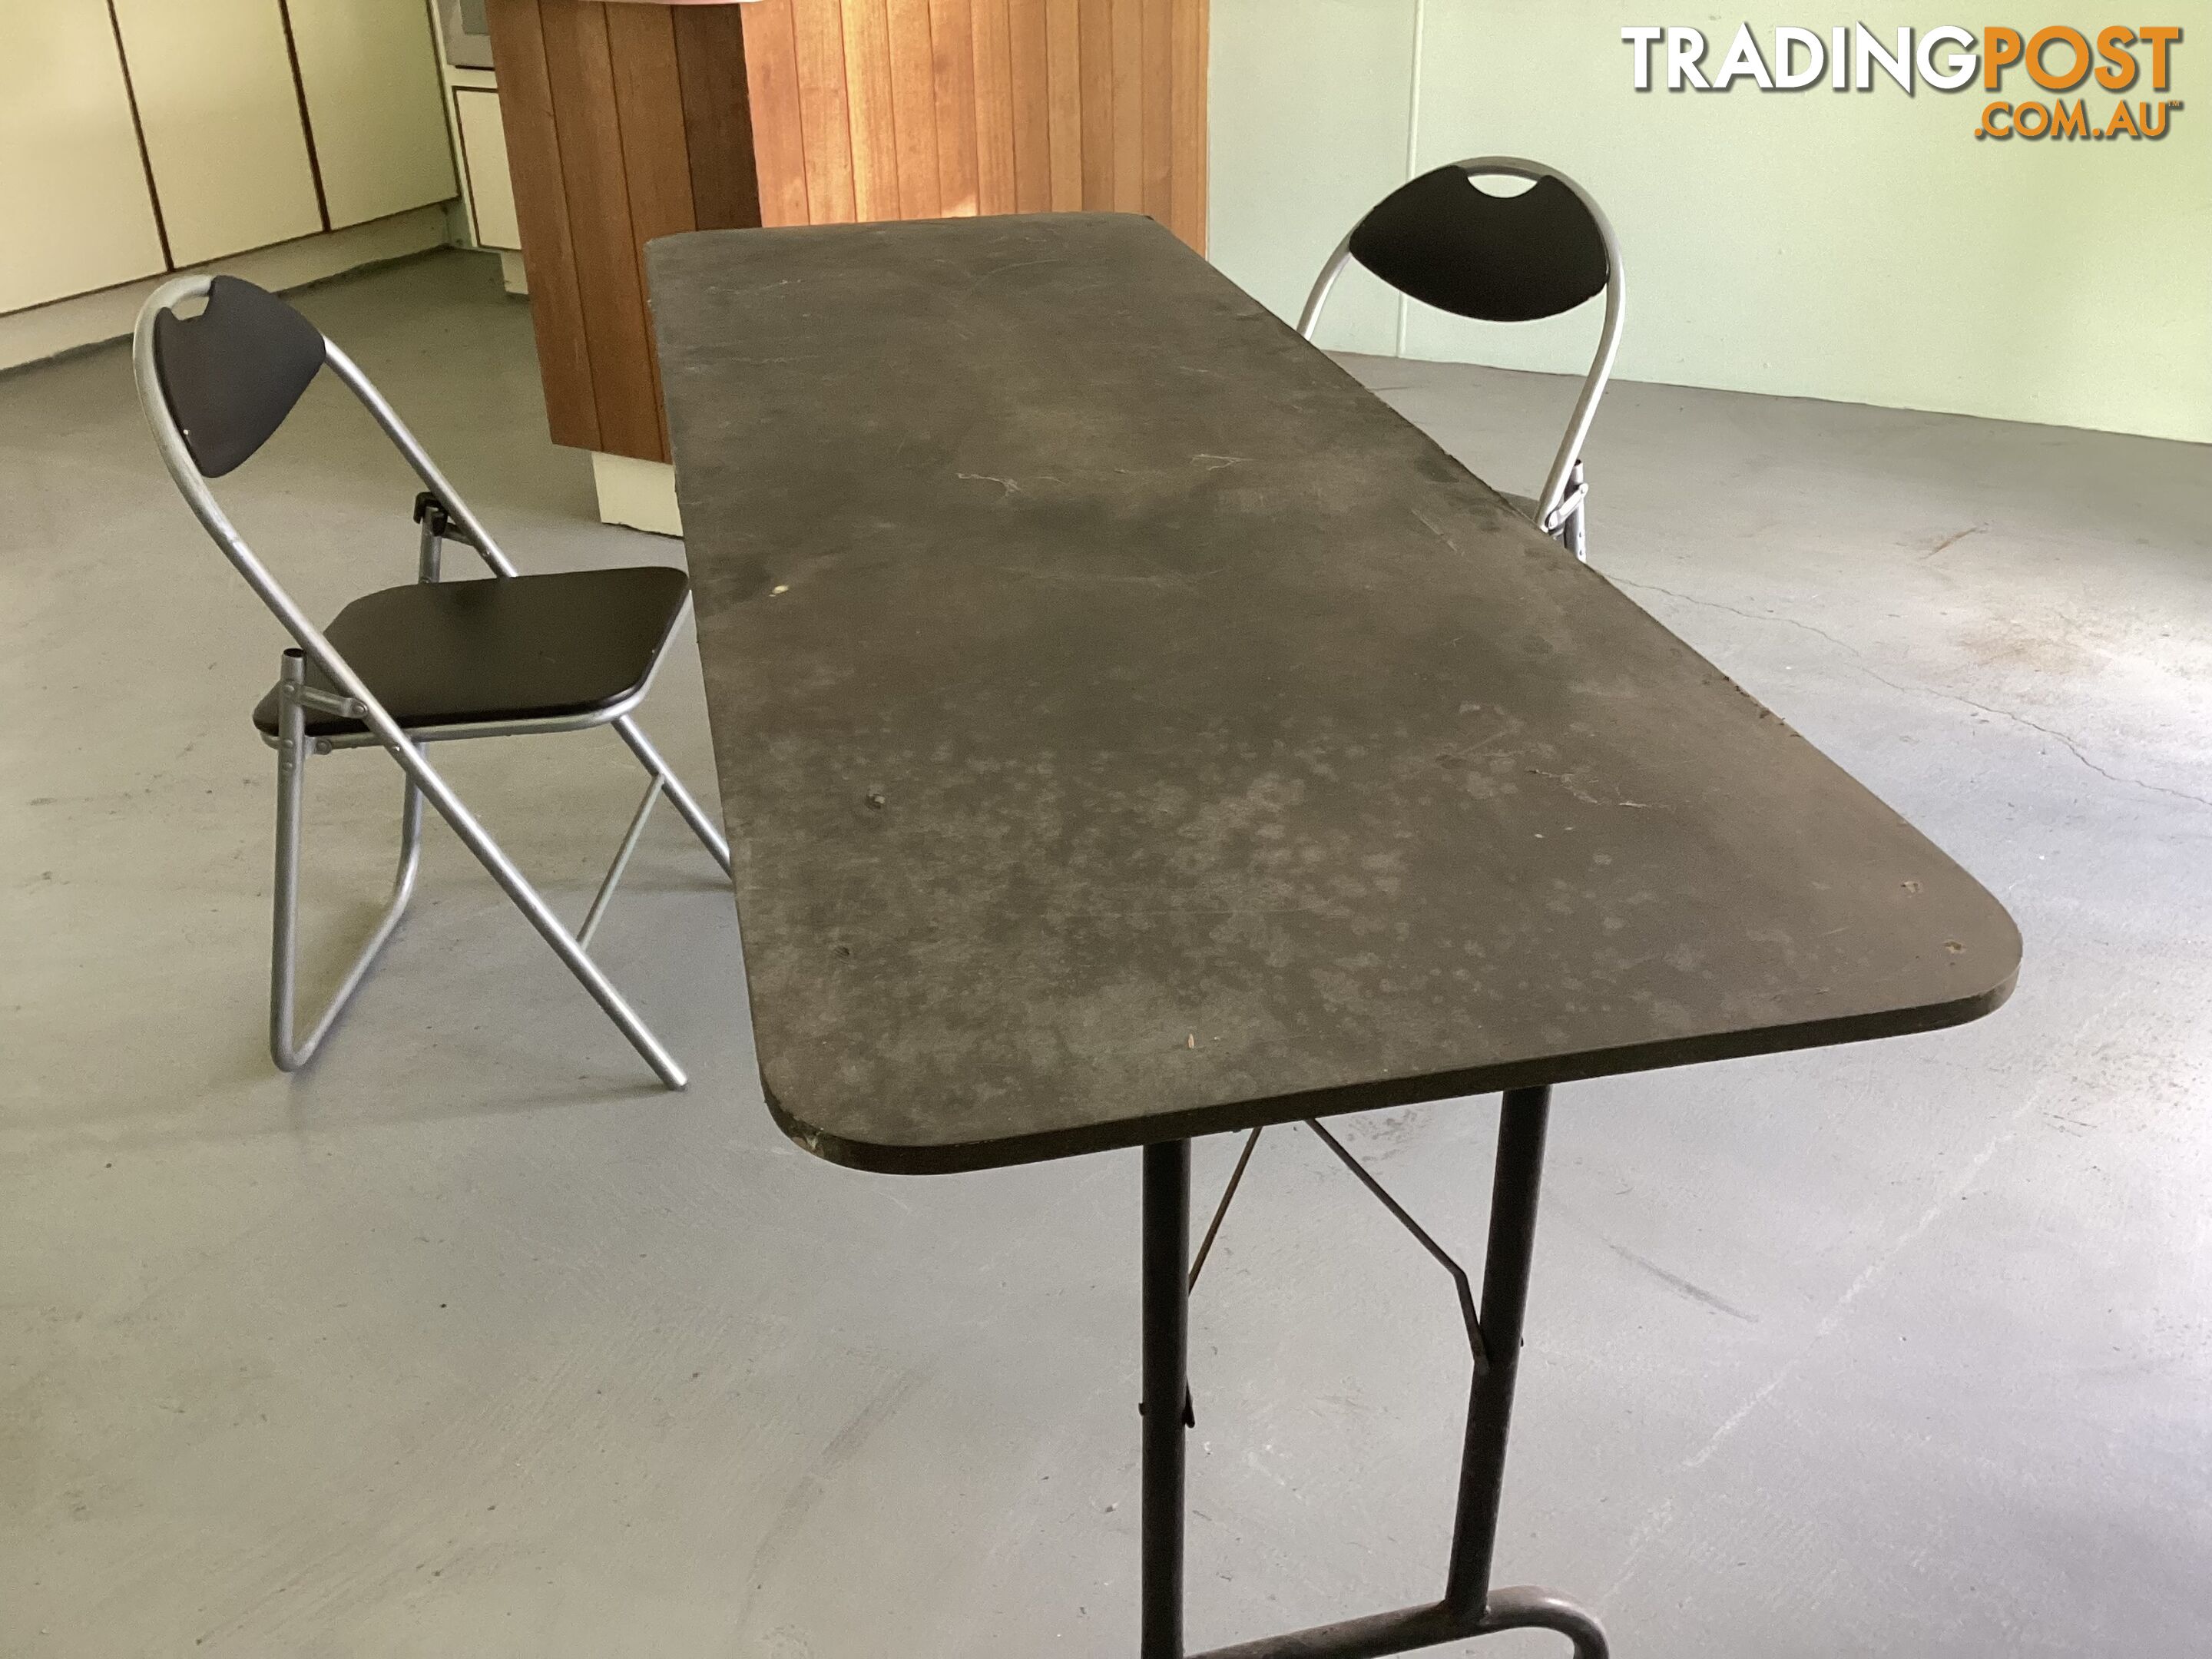 Folding tables and chairs